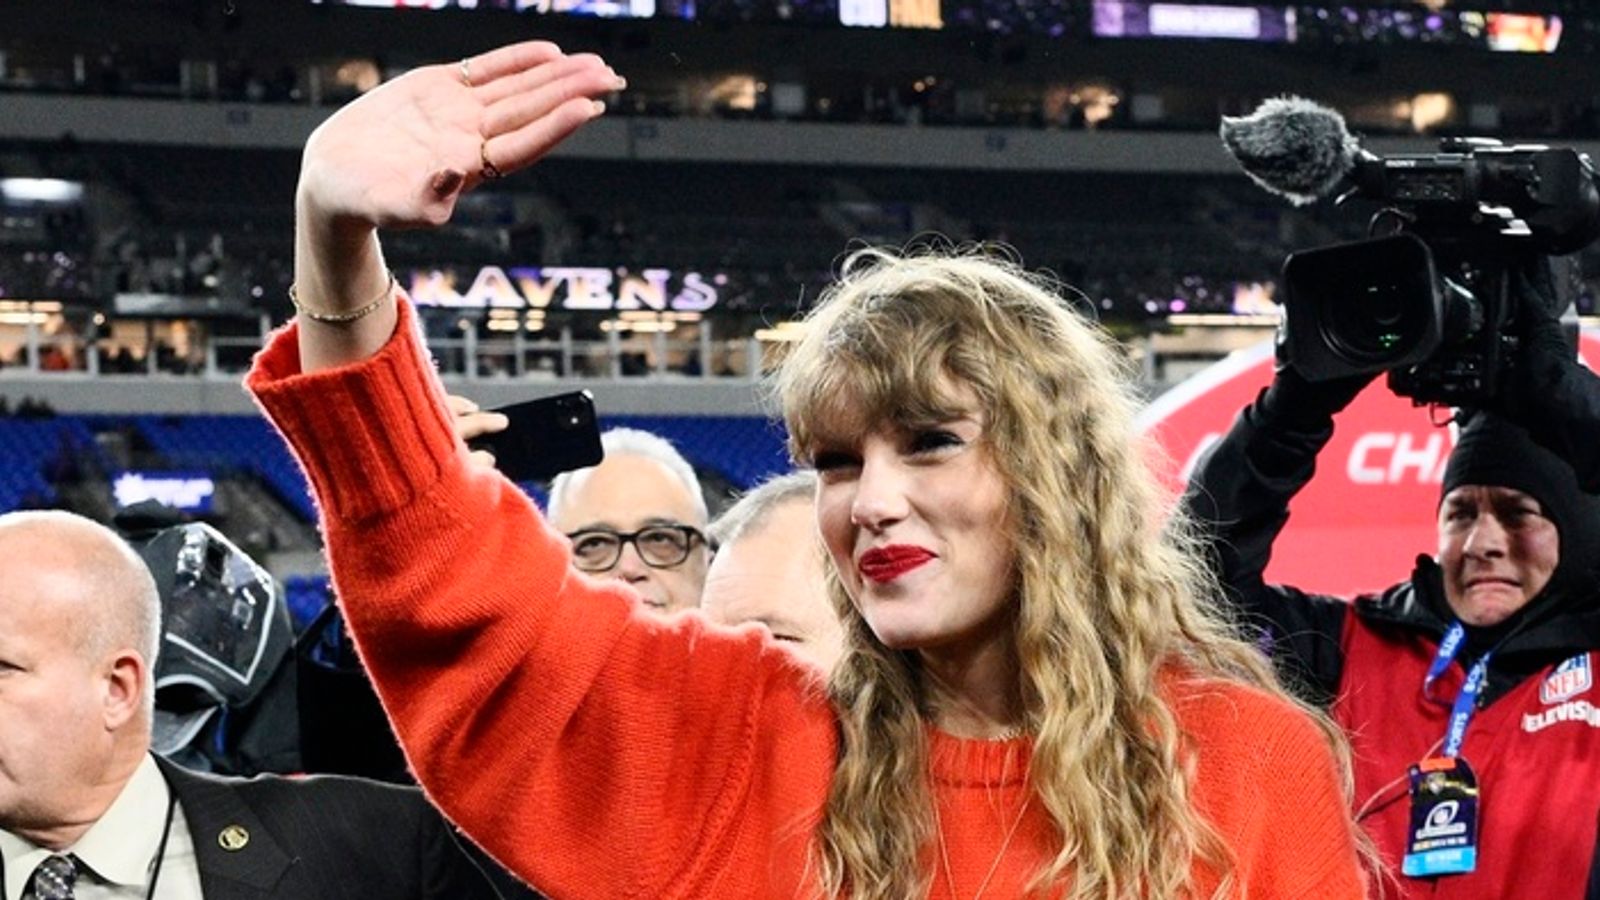 Taylor Swift is heading to the Super Bowl – triggering right-wing conspiracy theories | US News